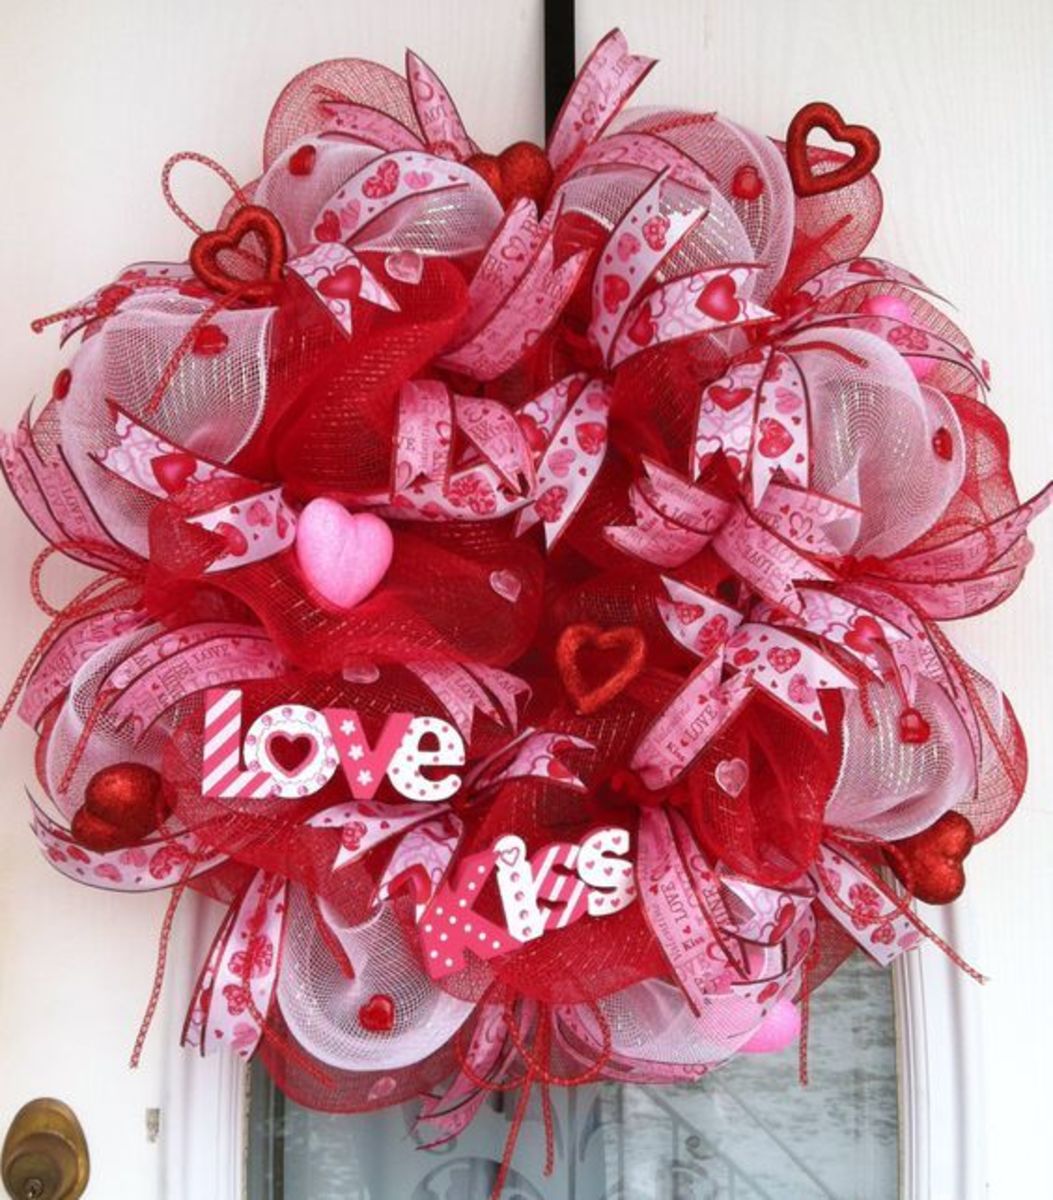 Heart-Covered "Love" and "Kiss" Wreath